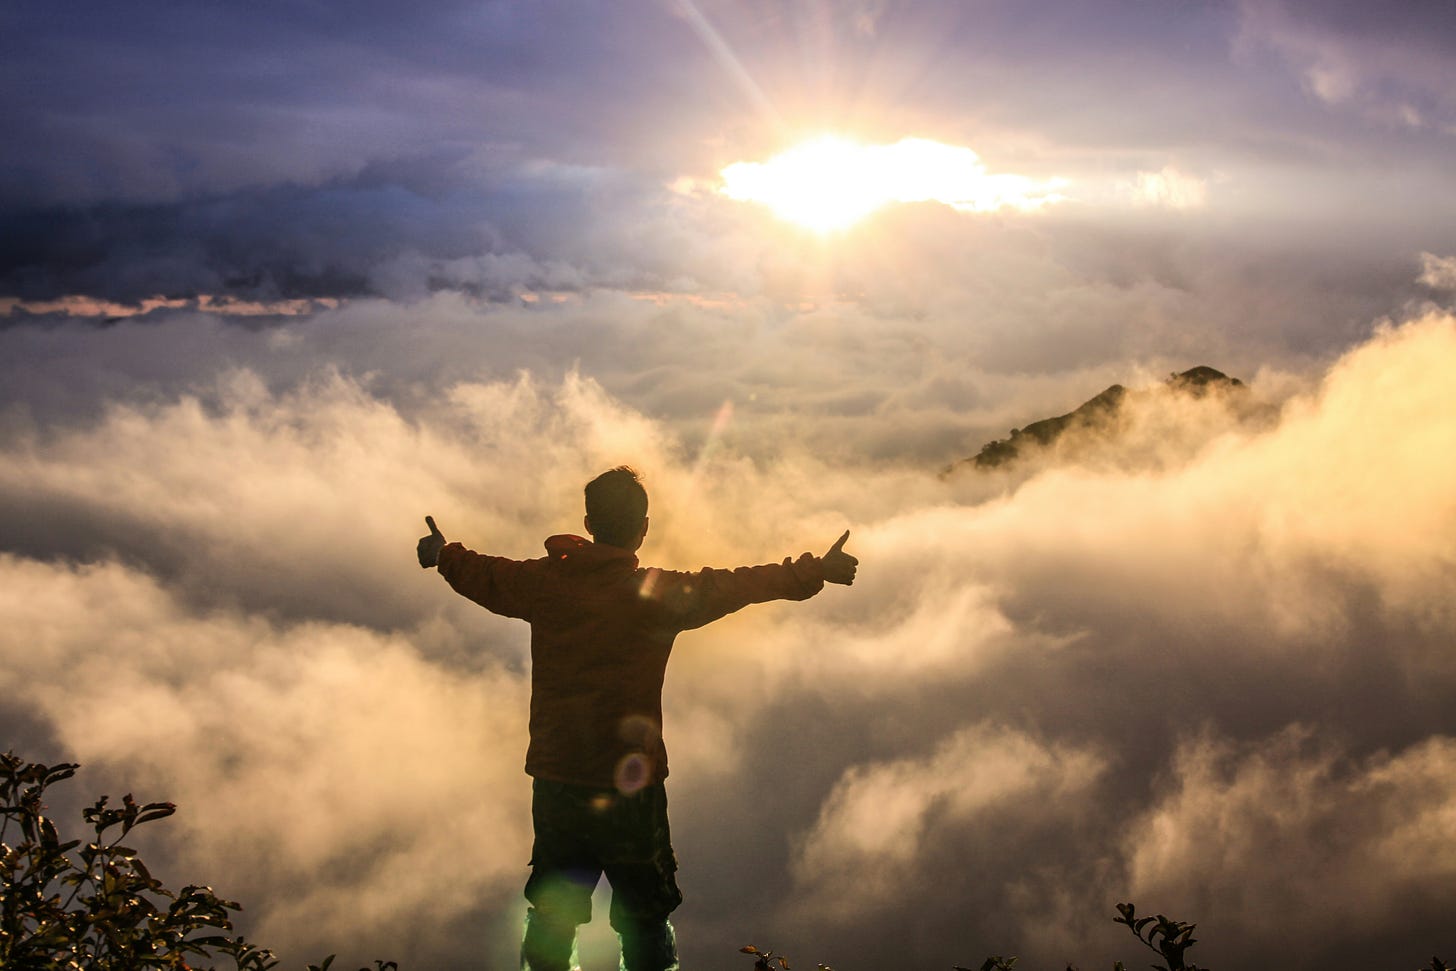 Image of a man on mountaintop with his back to the camera, arms extended and thumbs up, facing the setting or rising sun.   